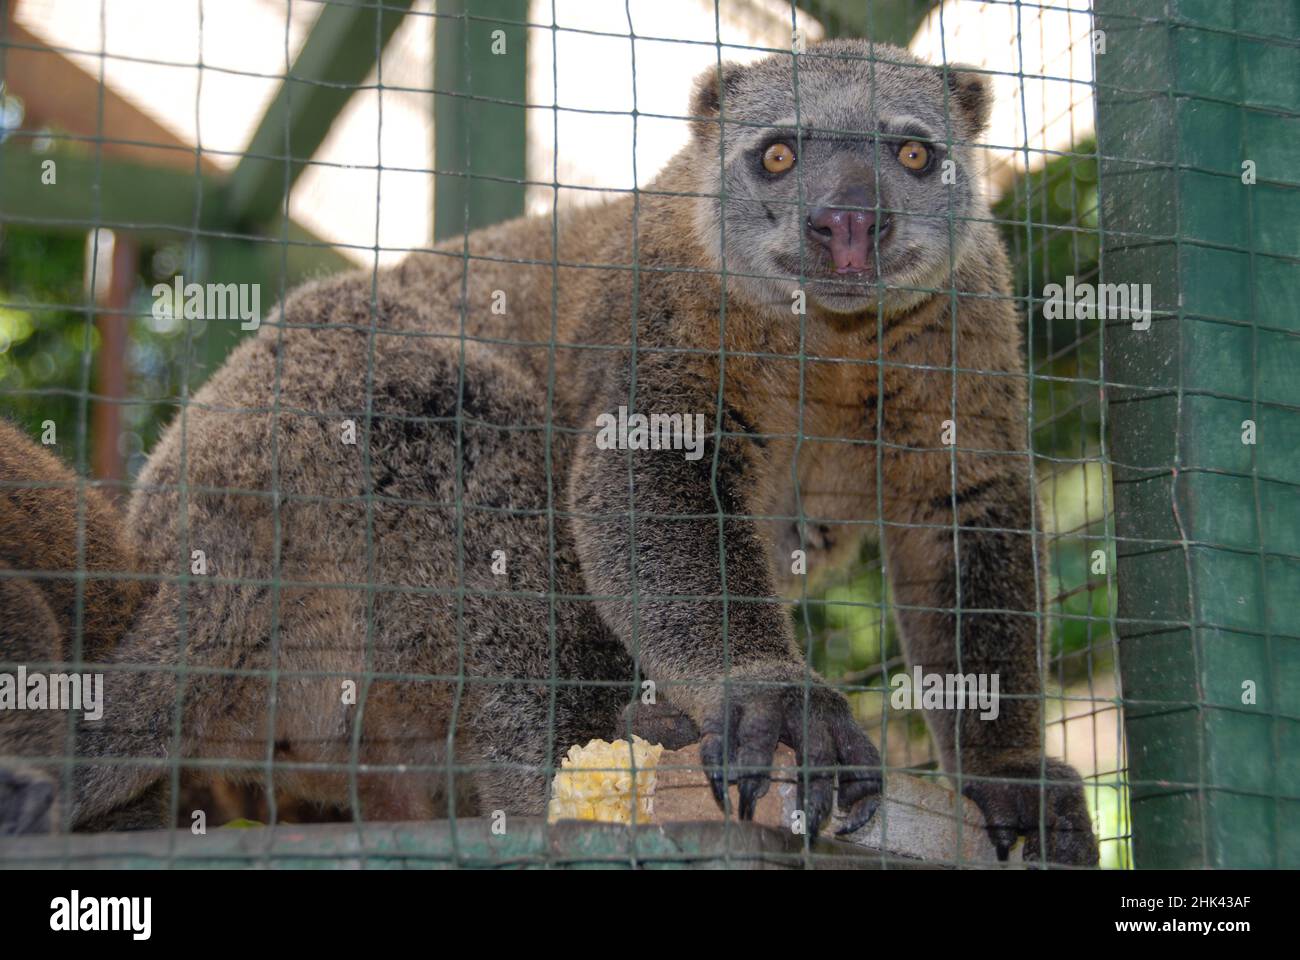 Sulawesi Bear Cuscus, Ailurops ursinus, in cage, Vulnerable, endemic to Sulawesi, private zoo, Bitung, Sulawesi, Indonesia Stock Photo